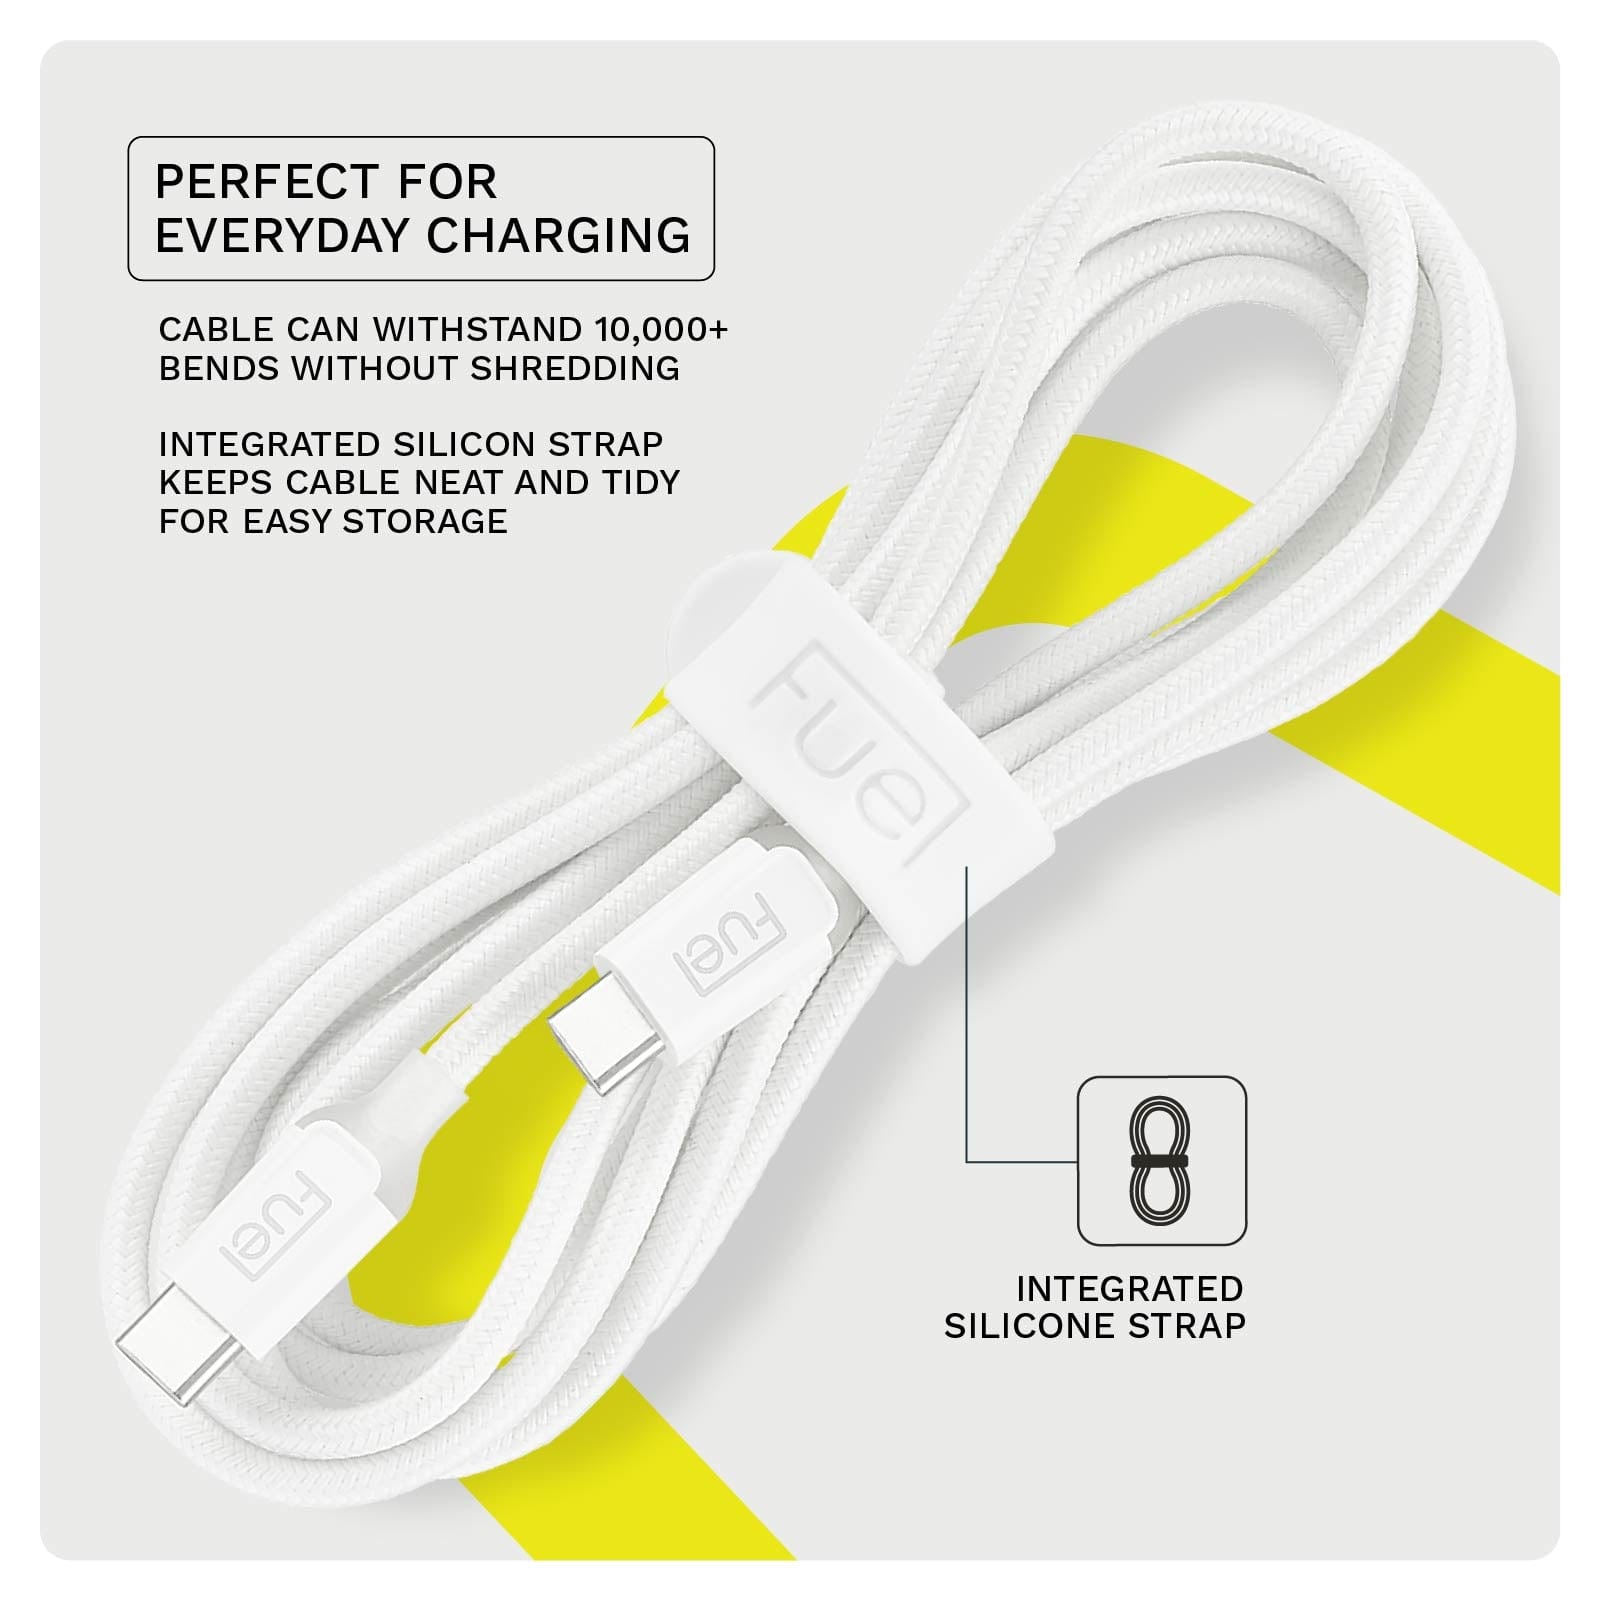 PERFECT FOR EVERYDAY CHARGING. CABLE CAN WITHSTAND 10,000+ BENDS WITHOUT SHREDDING. INTEGRATED SILICON STRAP KEEPS CABLE NEAT AND TIDY FOR EASY STORAGE.